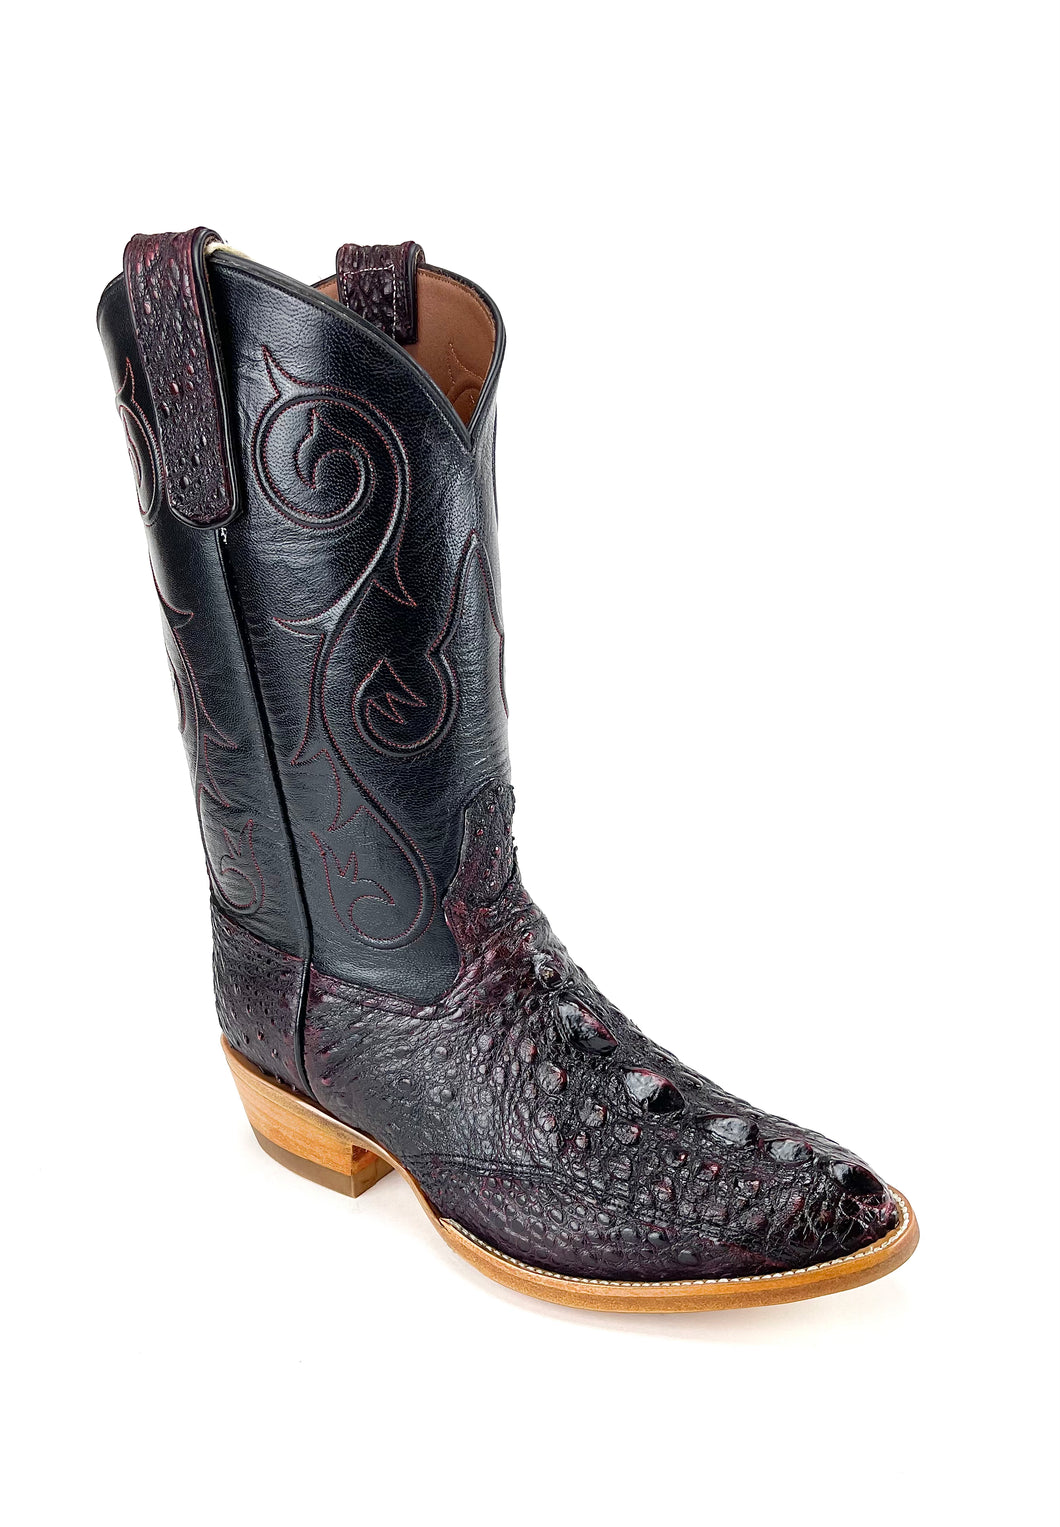 Limited Black Cherry Snapping Turtle Boots